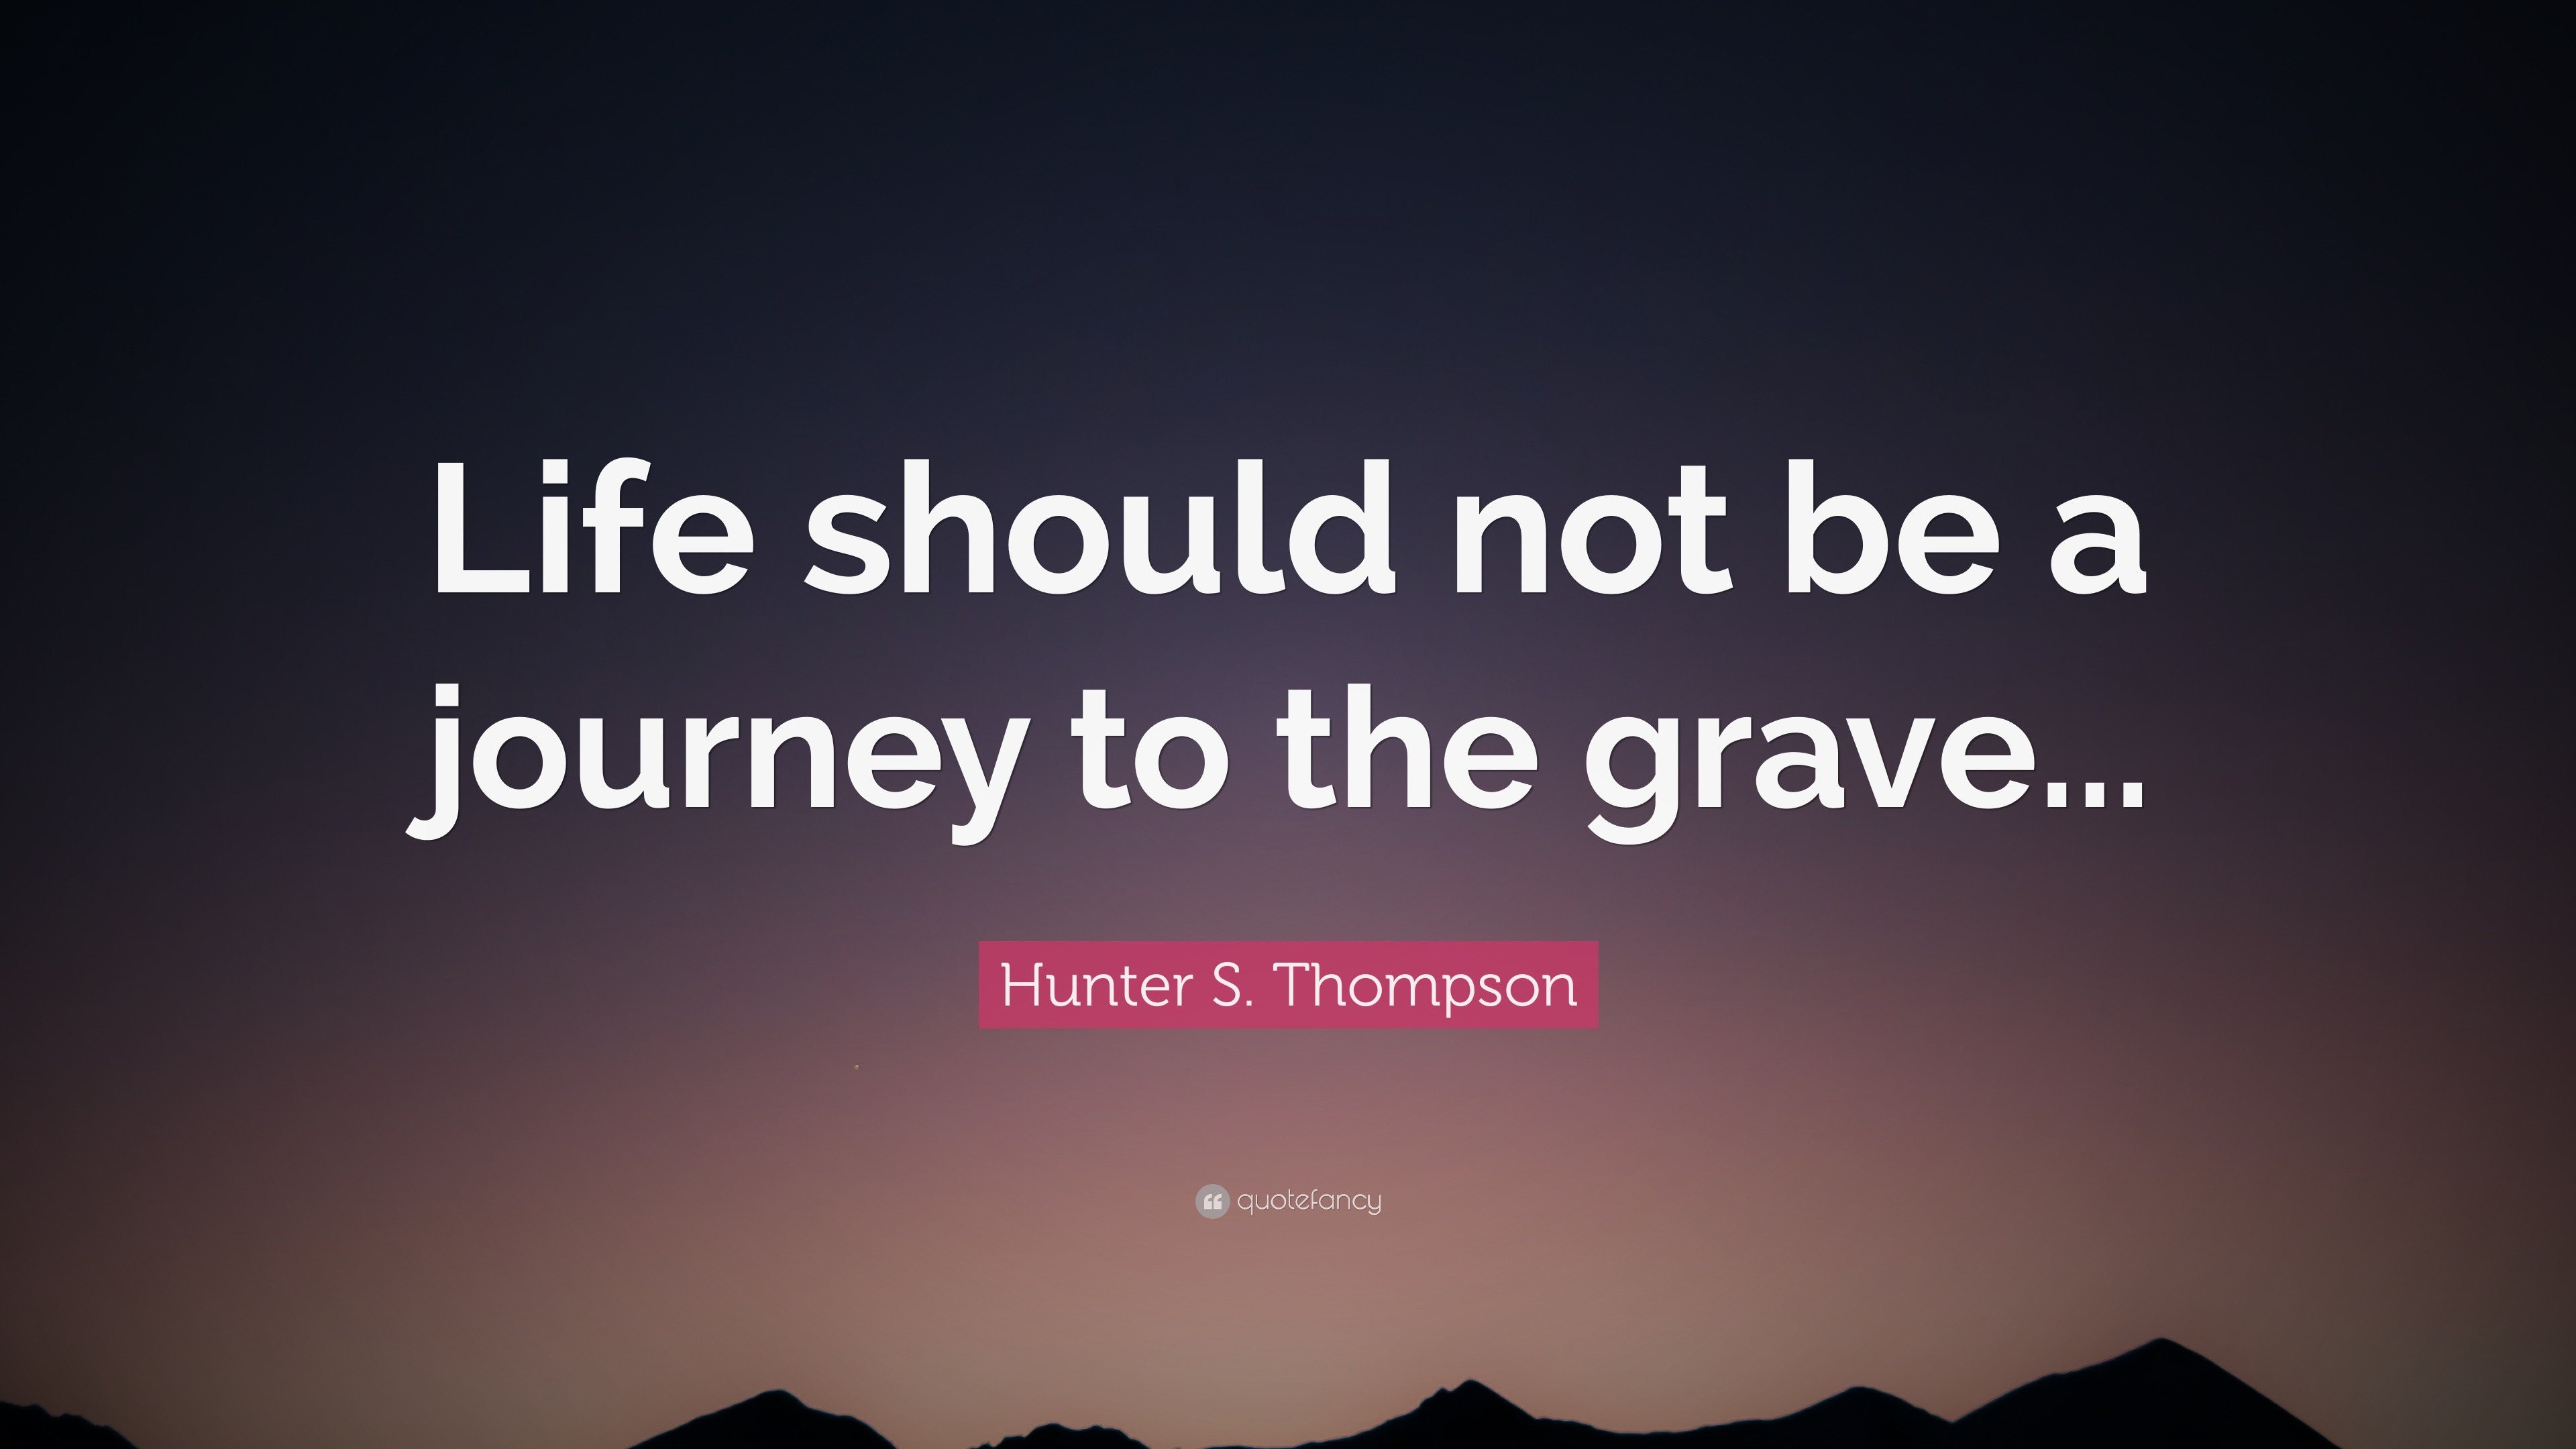 hunter thompson quotes lifes journey by christopher poole